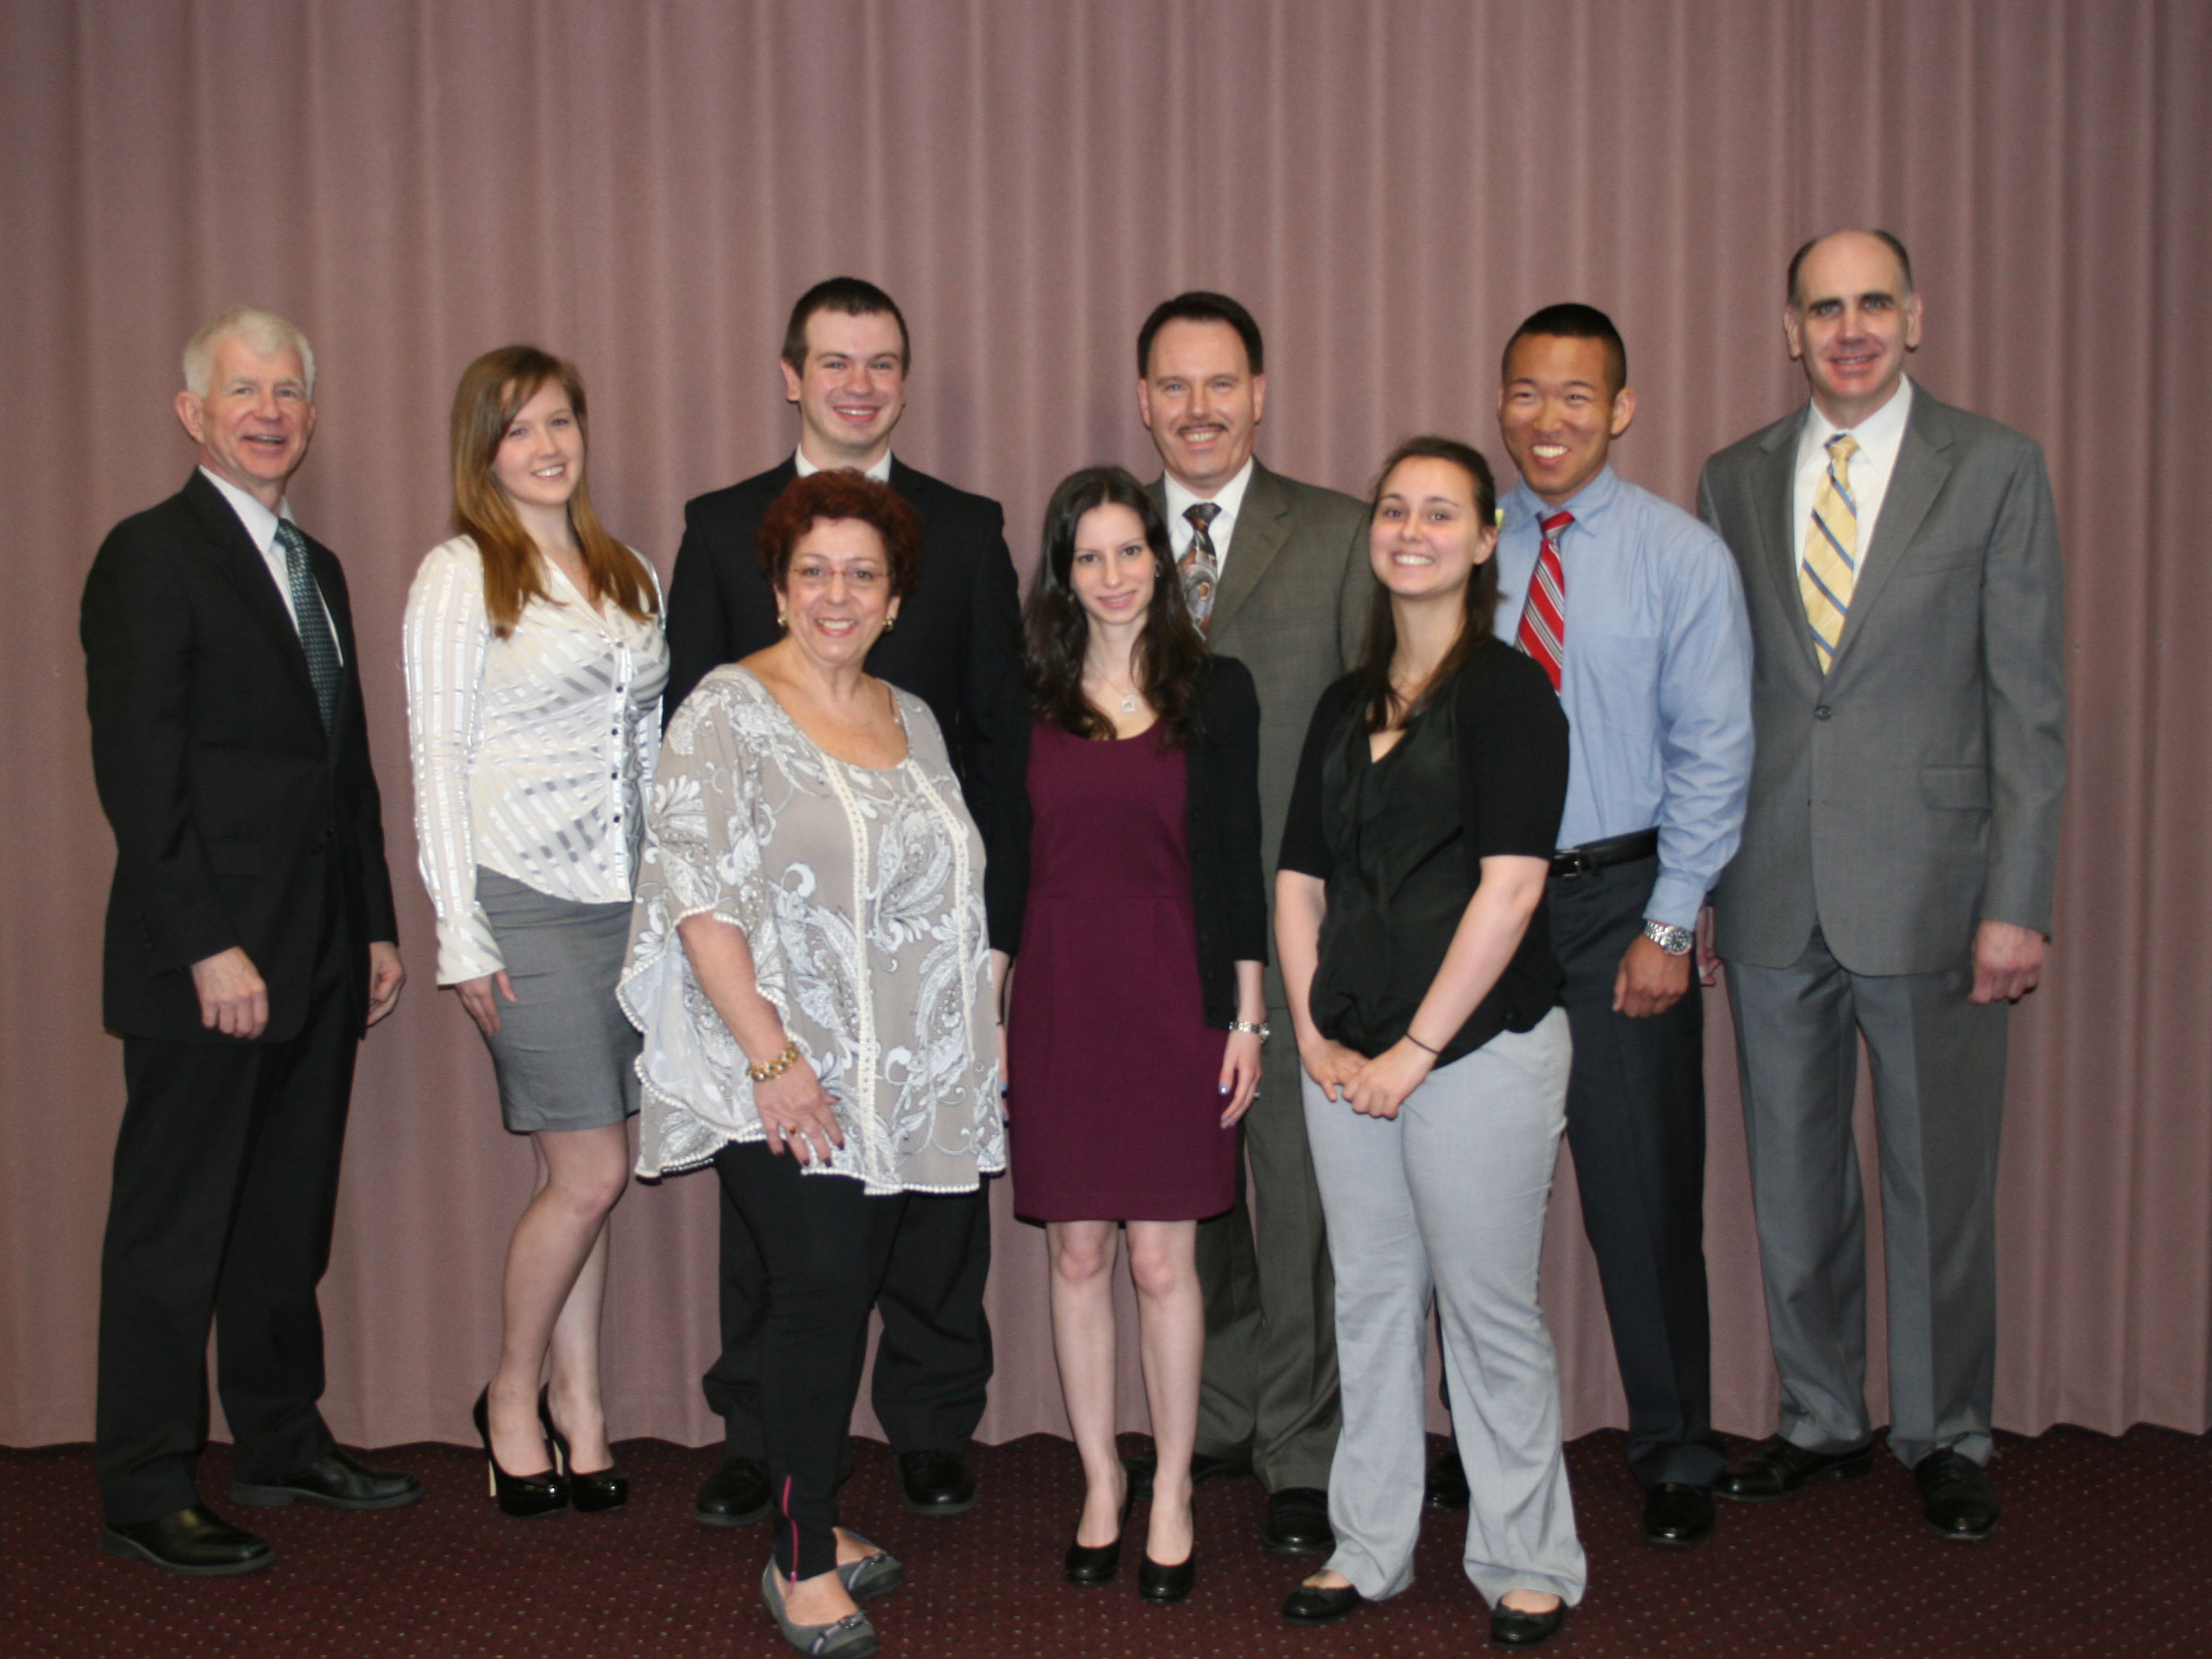 CSI Marketing Research Students Provide Valuable Insights to the Chamber of Commerce